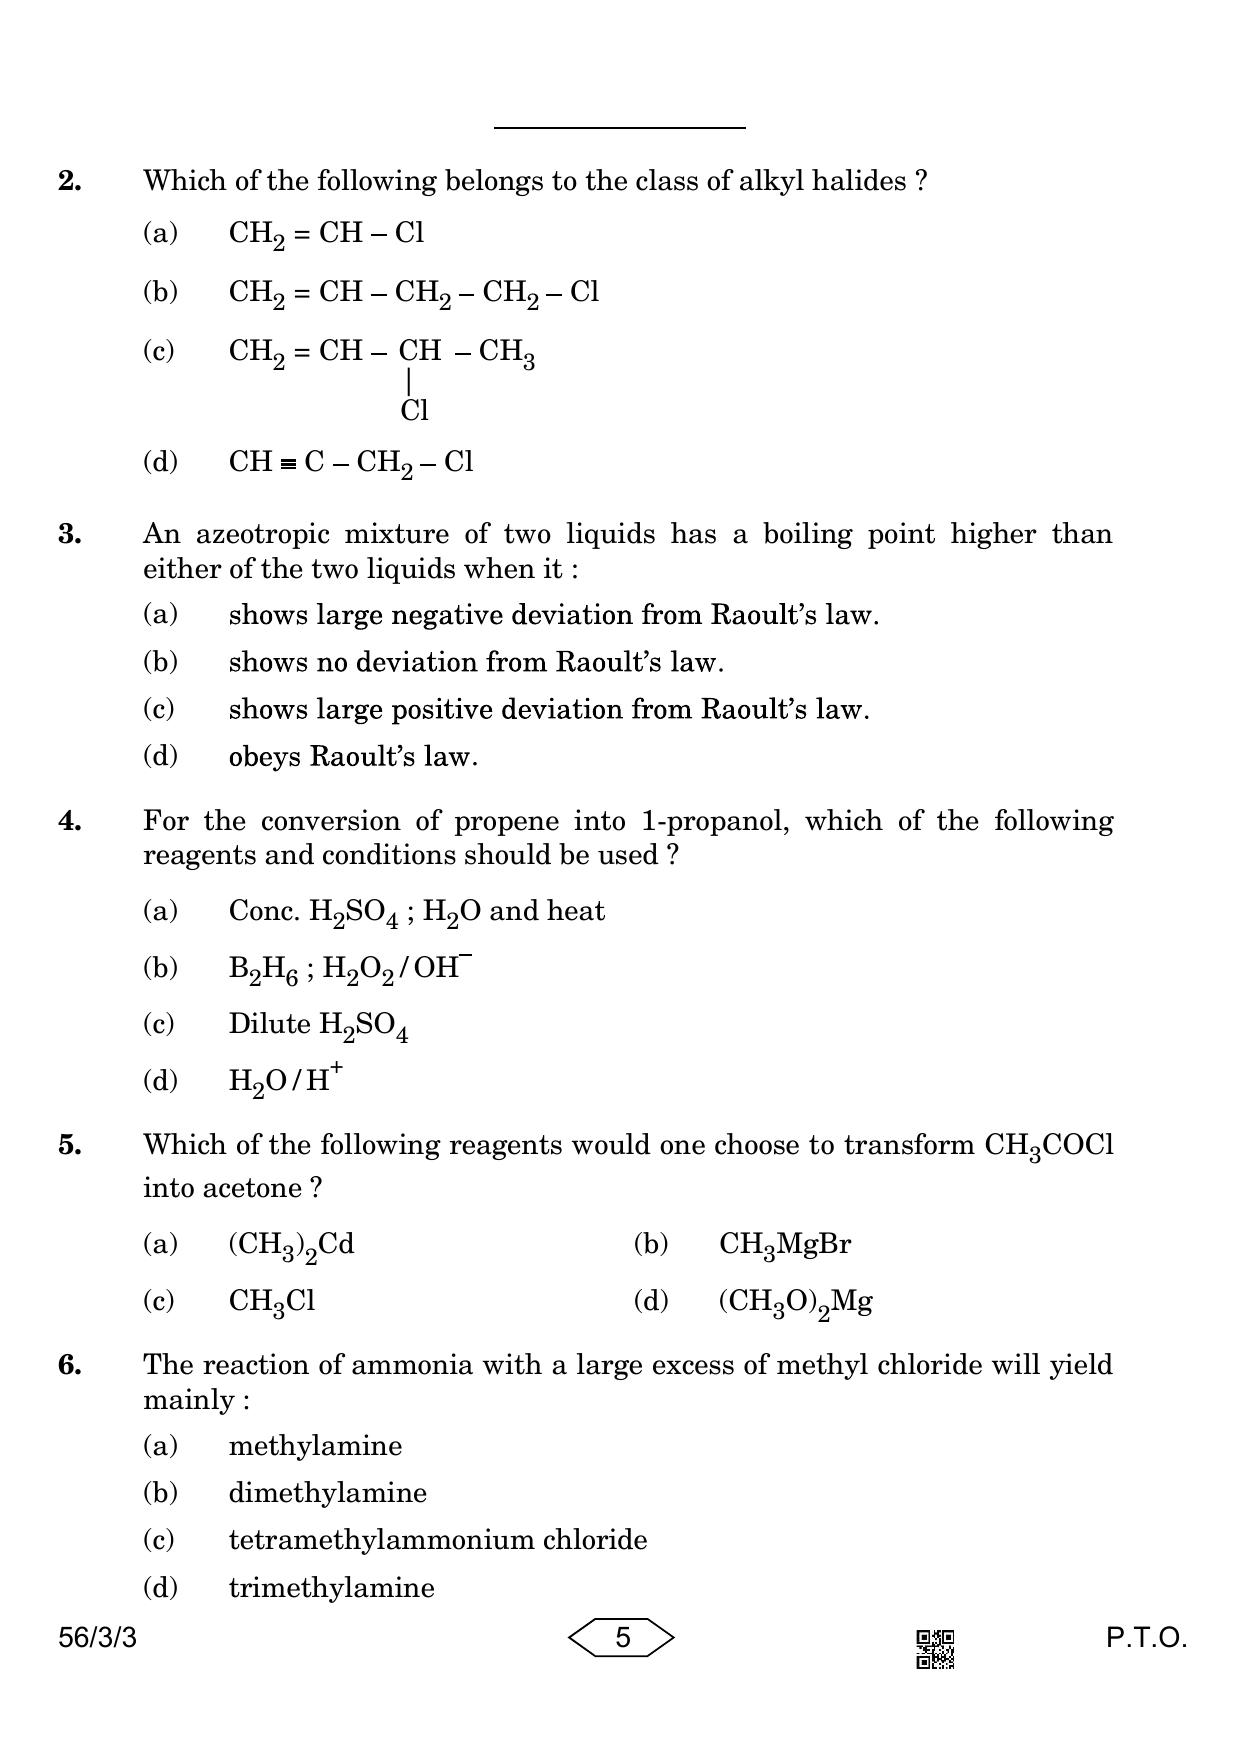 CBSE Class 12 56-3-3 Chemistry 2023 Question Paper - Page 5